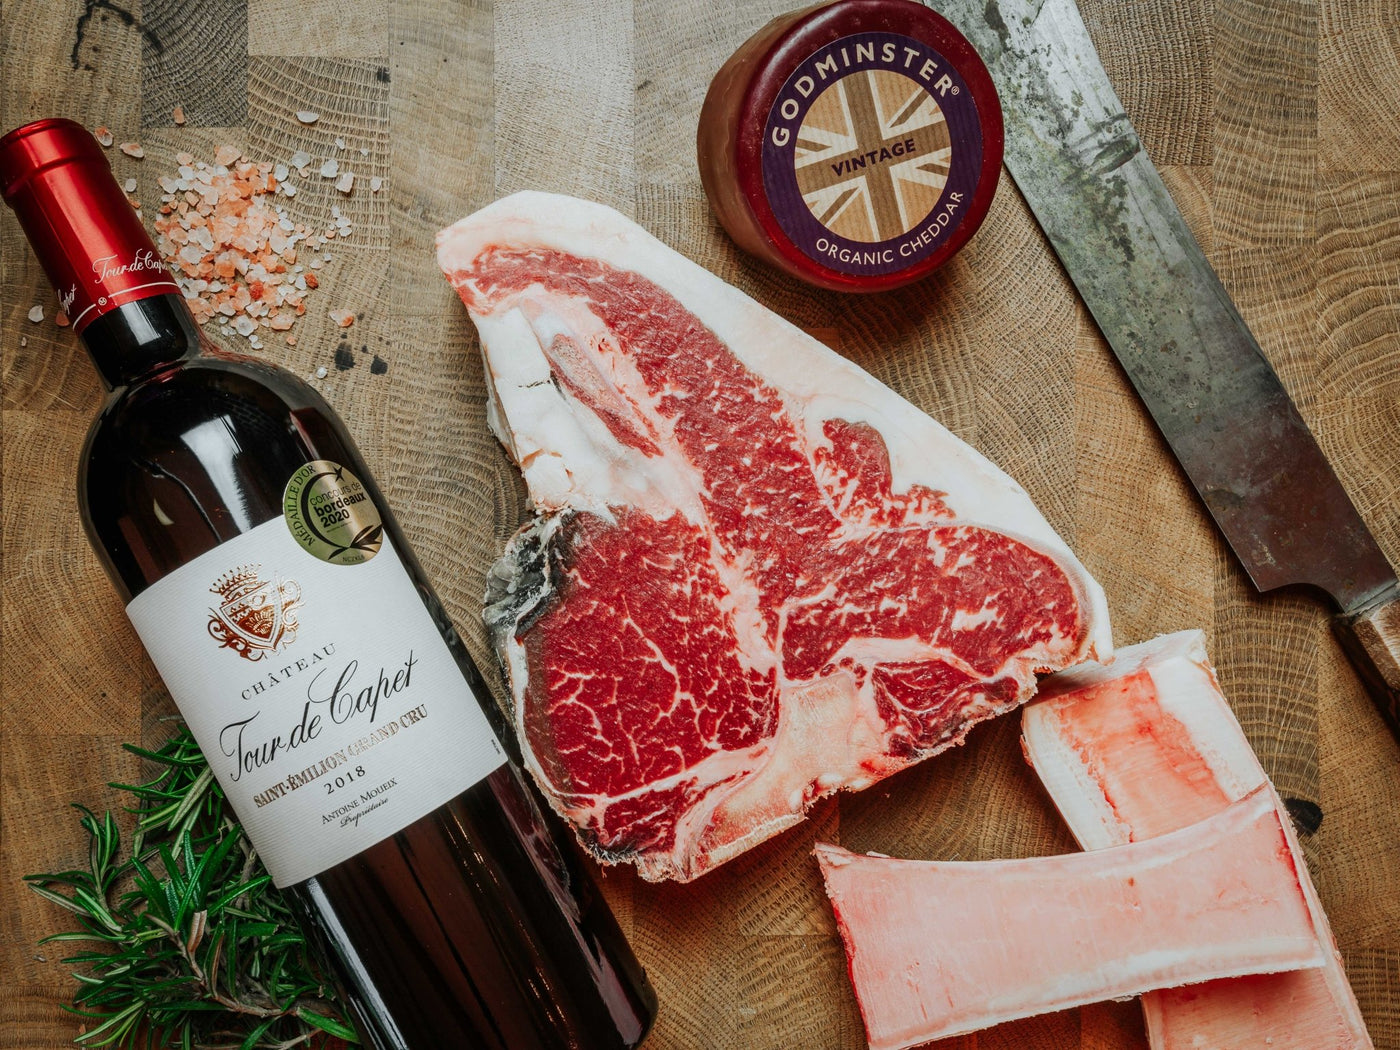 45 Day Dry-Aged Porterhouse Valentine's Day Box - Thomas Joseph Butchery - Ethical Dry-Aged Meat The Best Steak UK Thomas Joseph Butchery